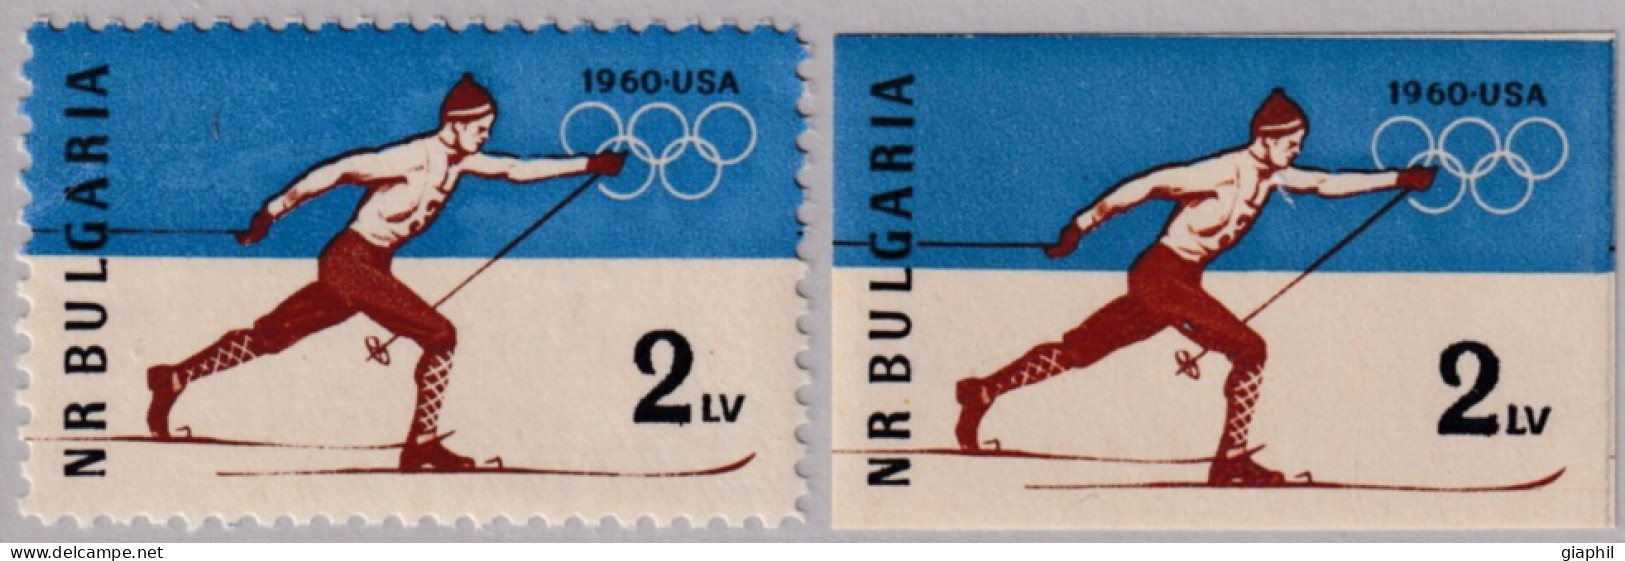 BULGARIA BULGARIE 1960 SQUAW VALLEY OLYMPIC GAMES SET (Mi 1152A-1152B) MNH ** OFFER! - Inverno1960: Squaw Valley